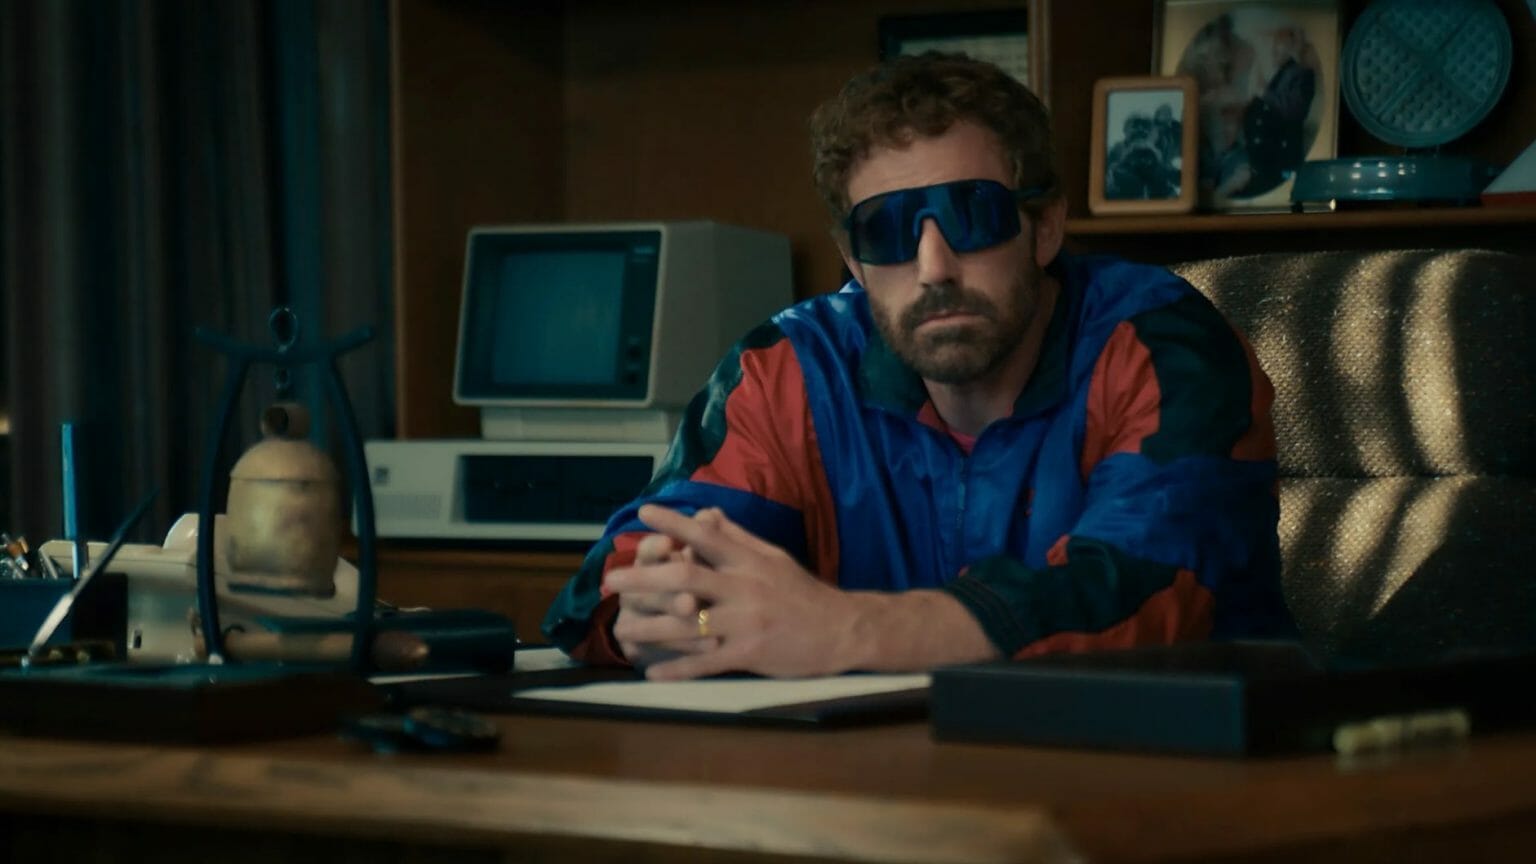 Ben Affleck stars as Nike CEO Phil Night wearing large blue goofy sunglasses and a matching tracksuit while sitting in his corporate office in the movie AIR from Amazon Studios.